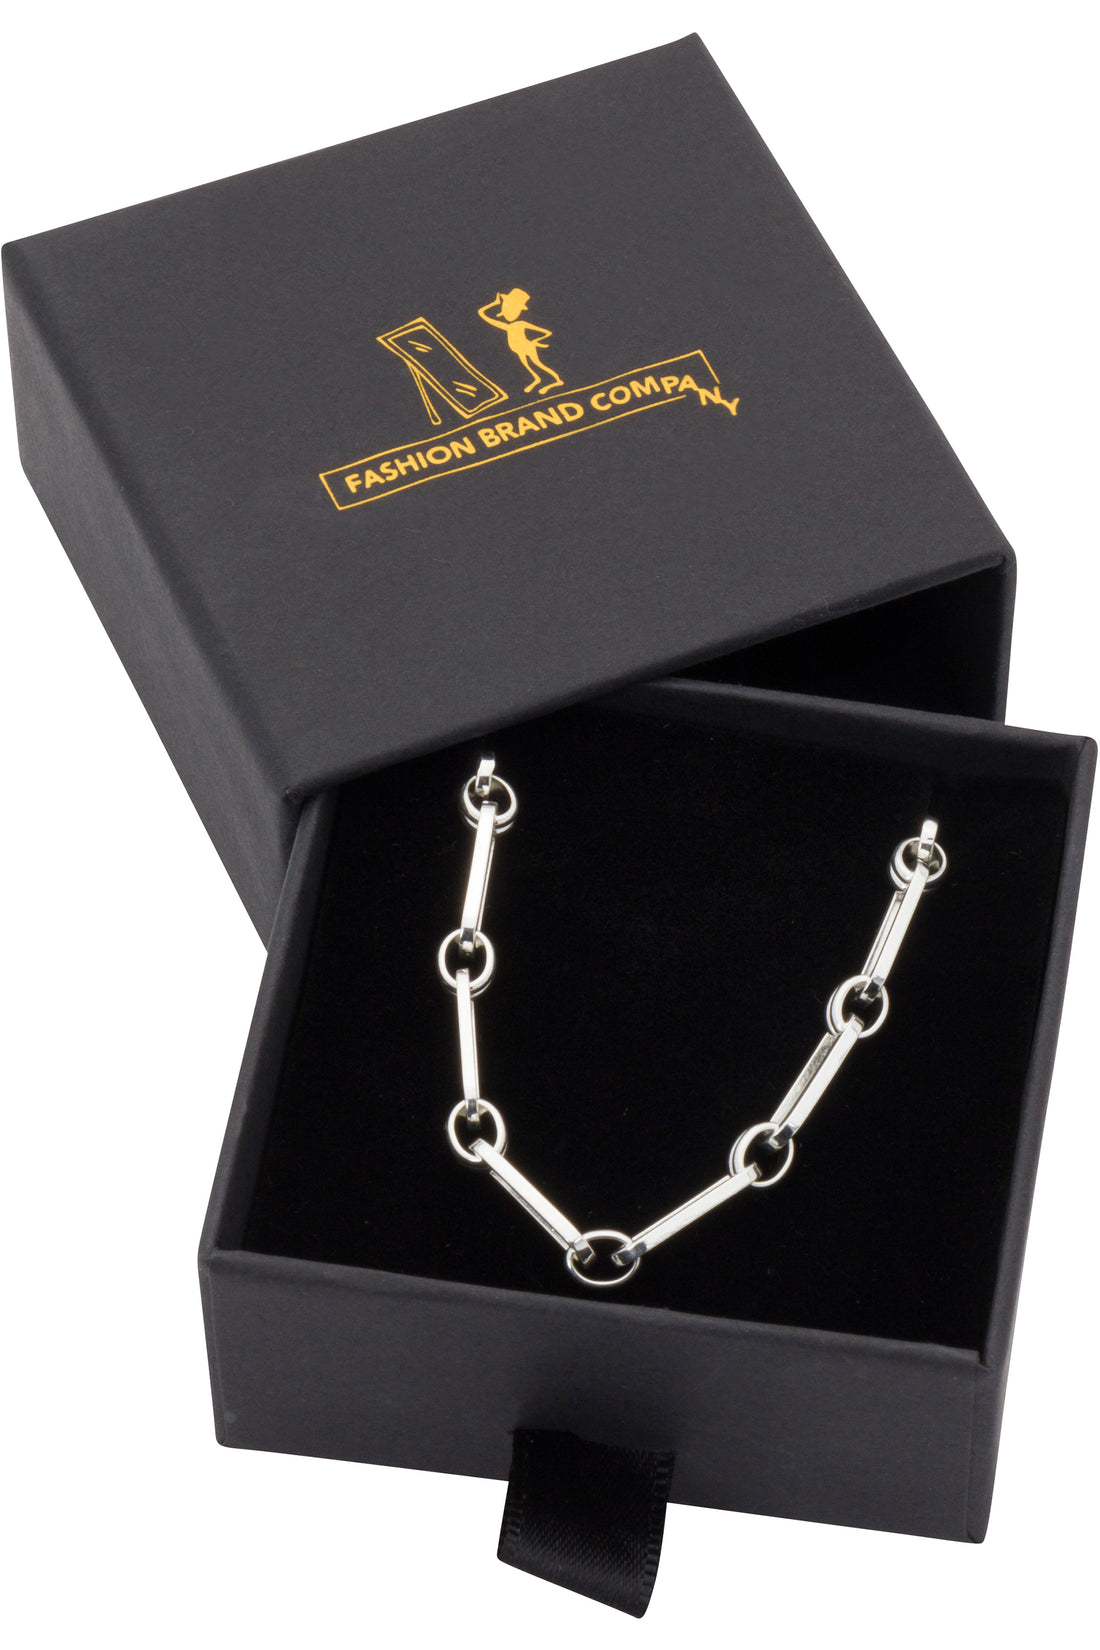 CEO Chain Sterling Silver